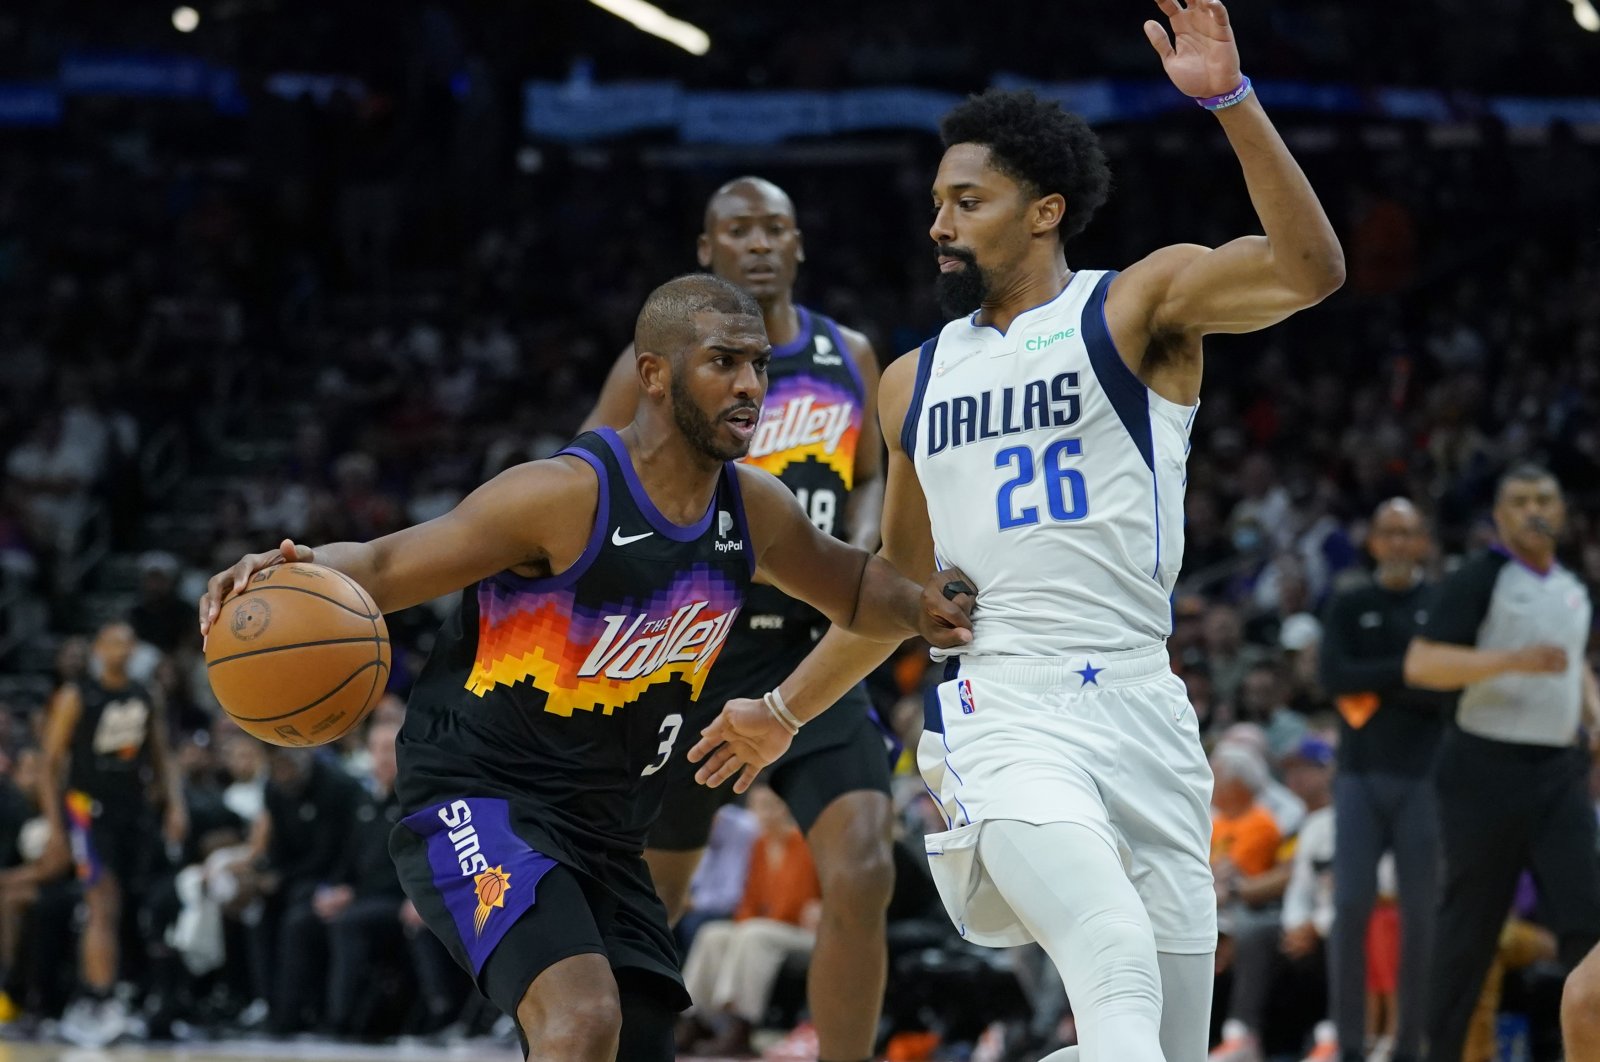 Suns Chris Paul (L) drives to the basket against Mavericks Spencer Dinwiddie in an NBA playoffs game, Phoenix, U.S., May 4, 2022. (AP Photo)